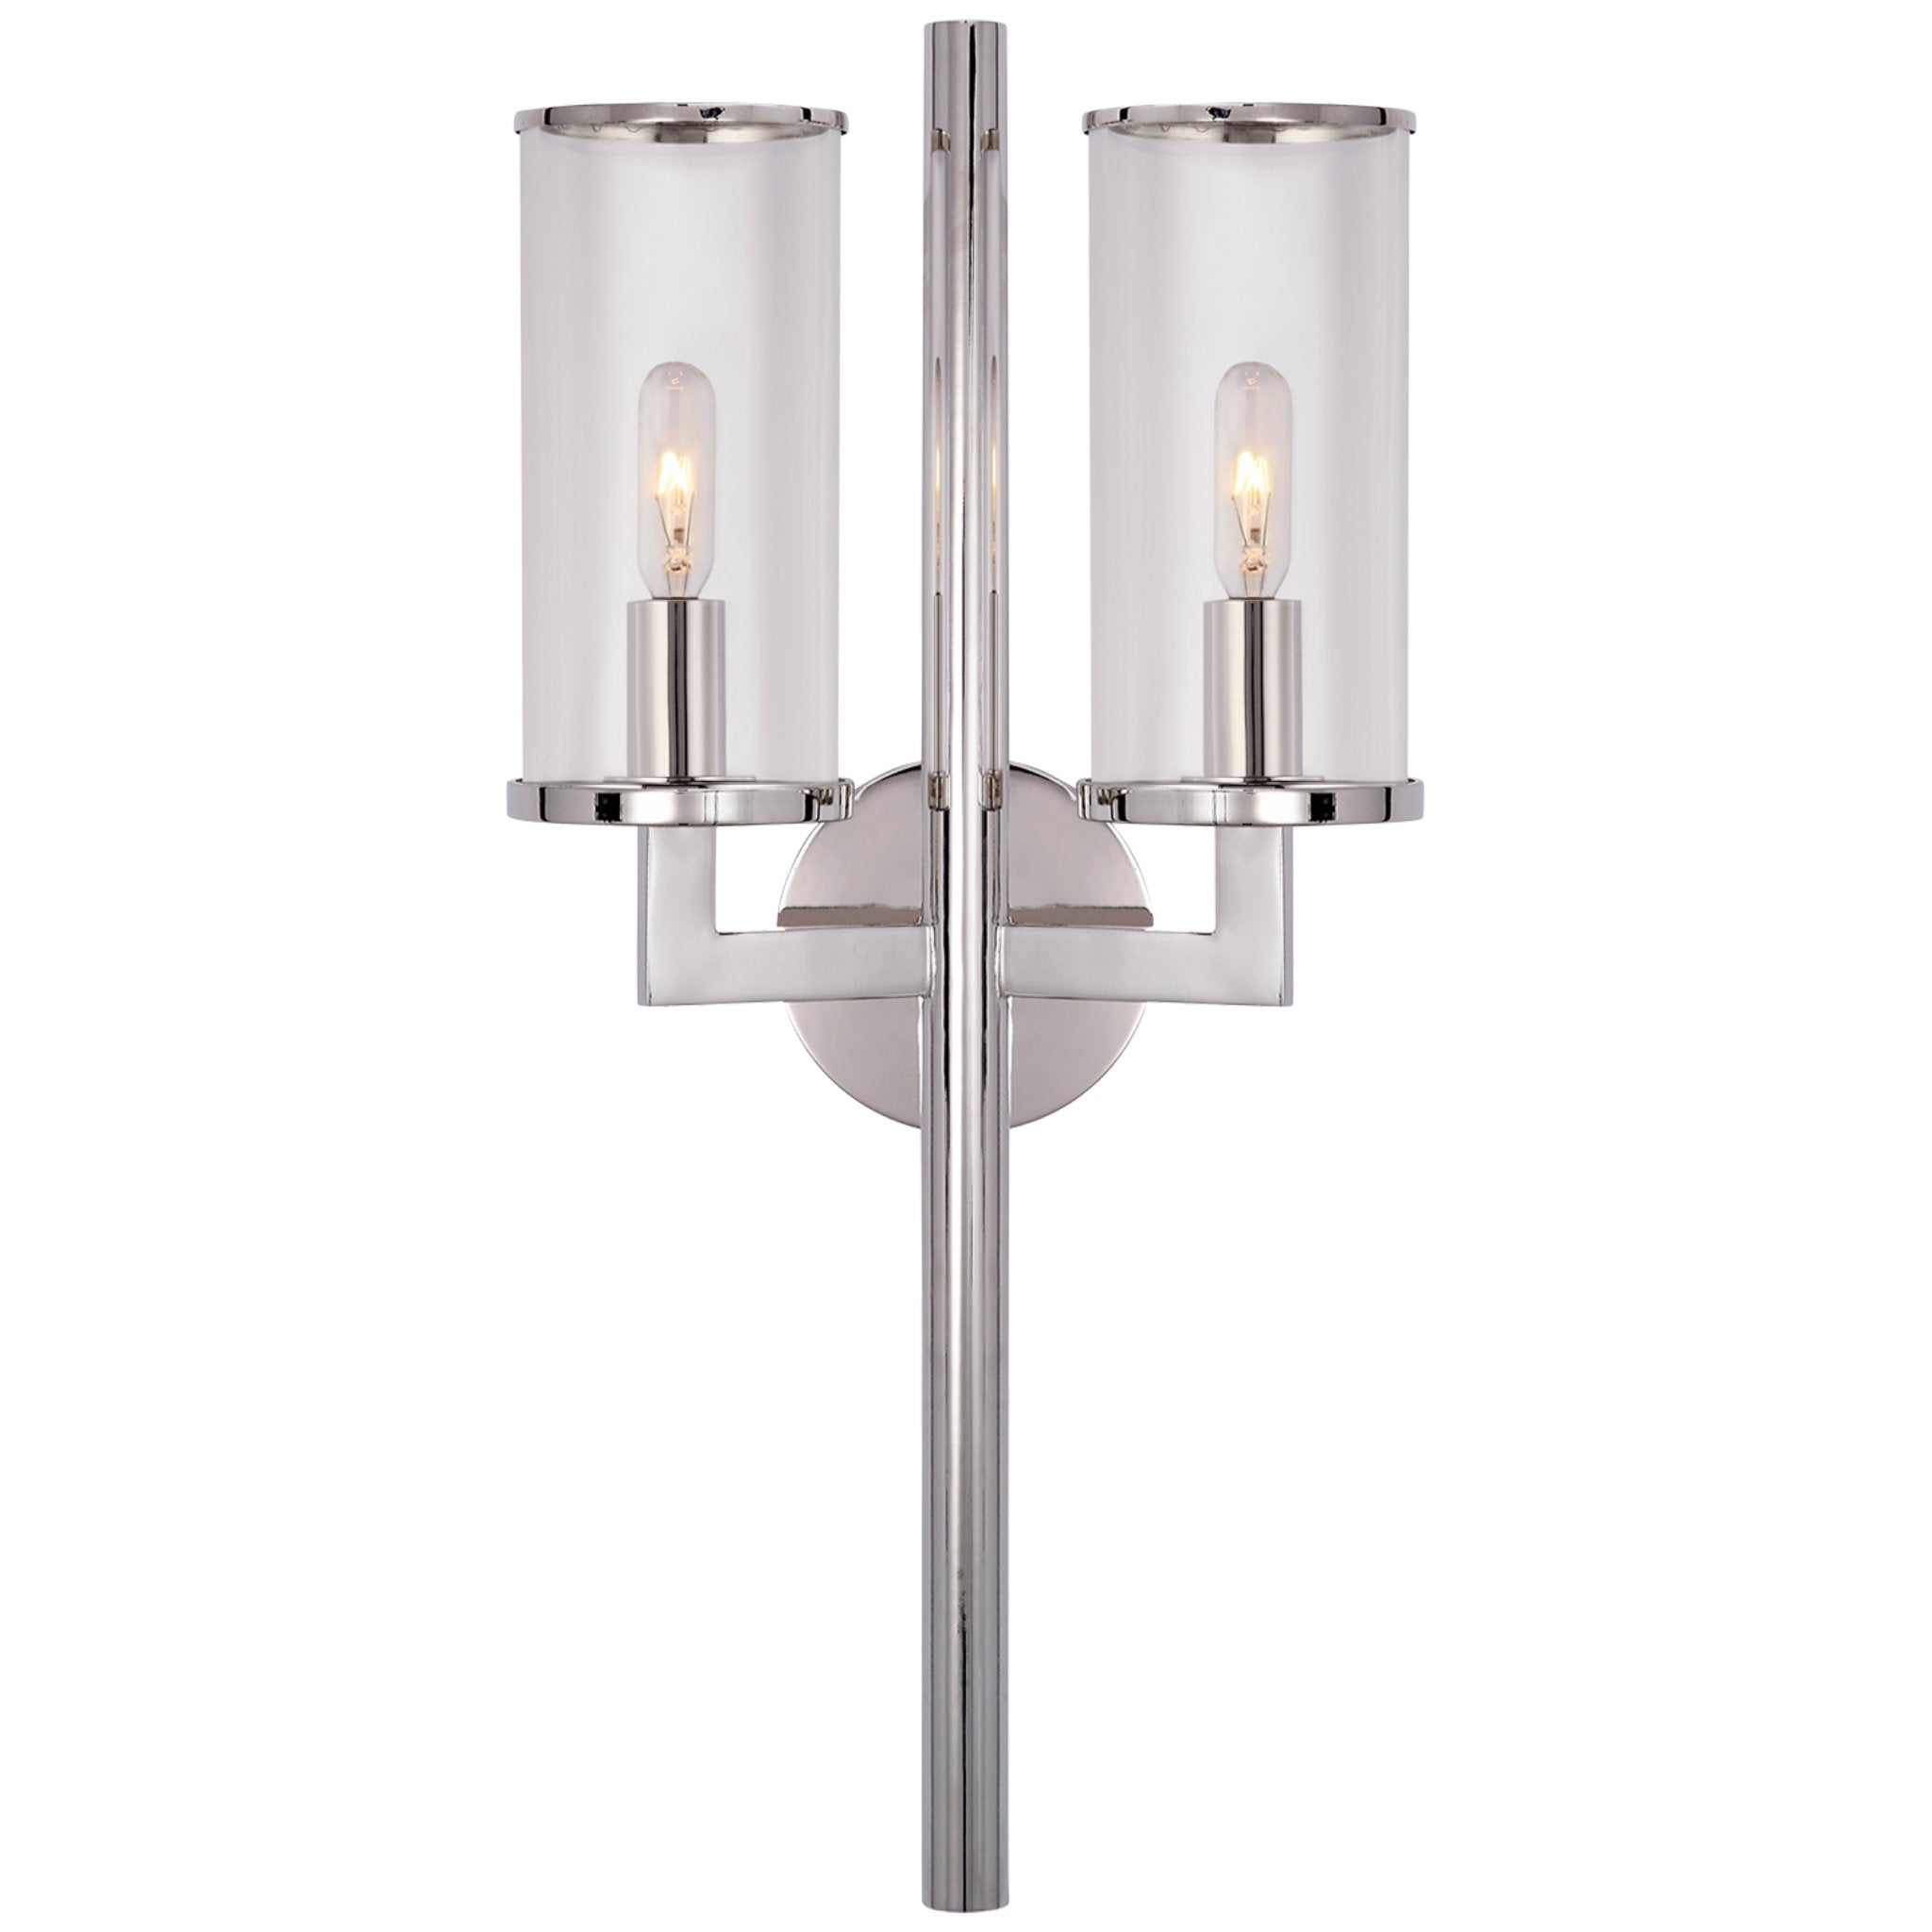 Kelly Wearstler Liaison Double Sconce in Polished Nickel with Clear Glass